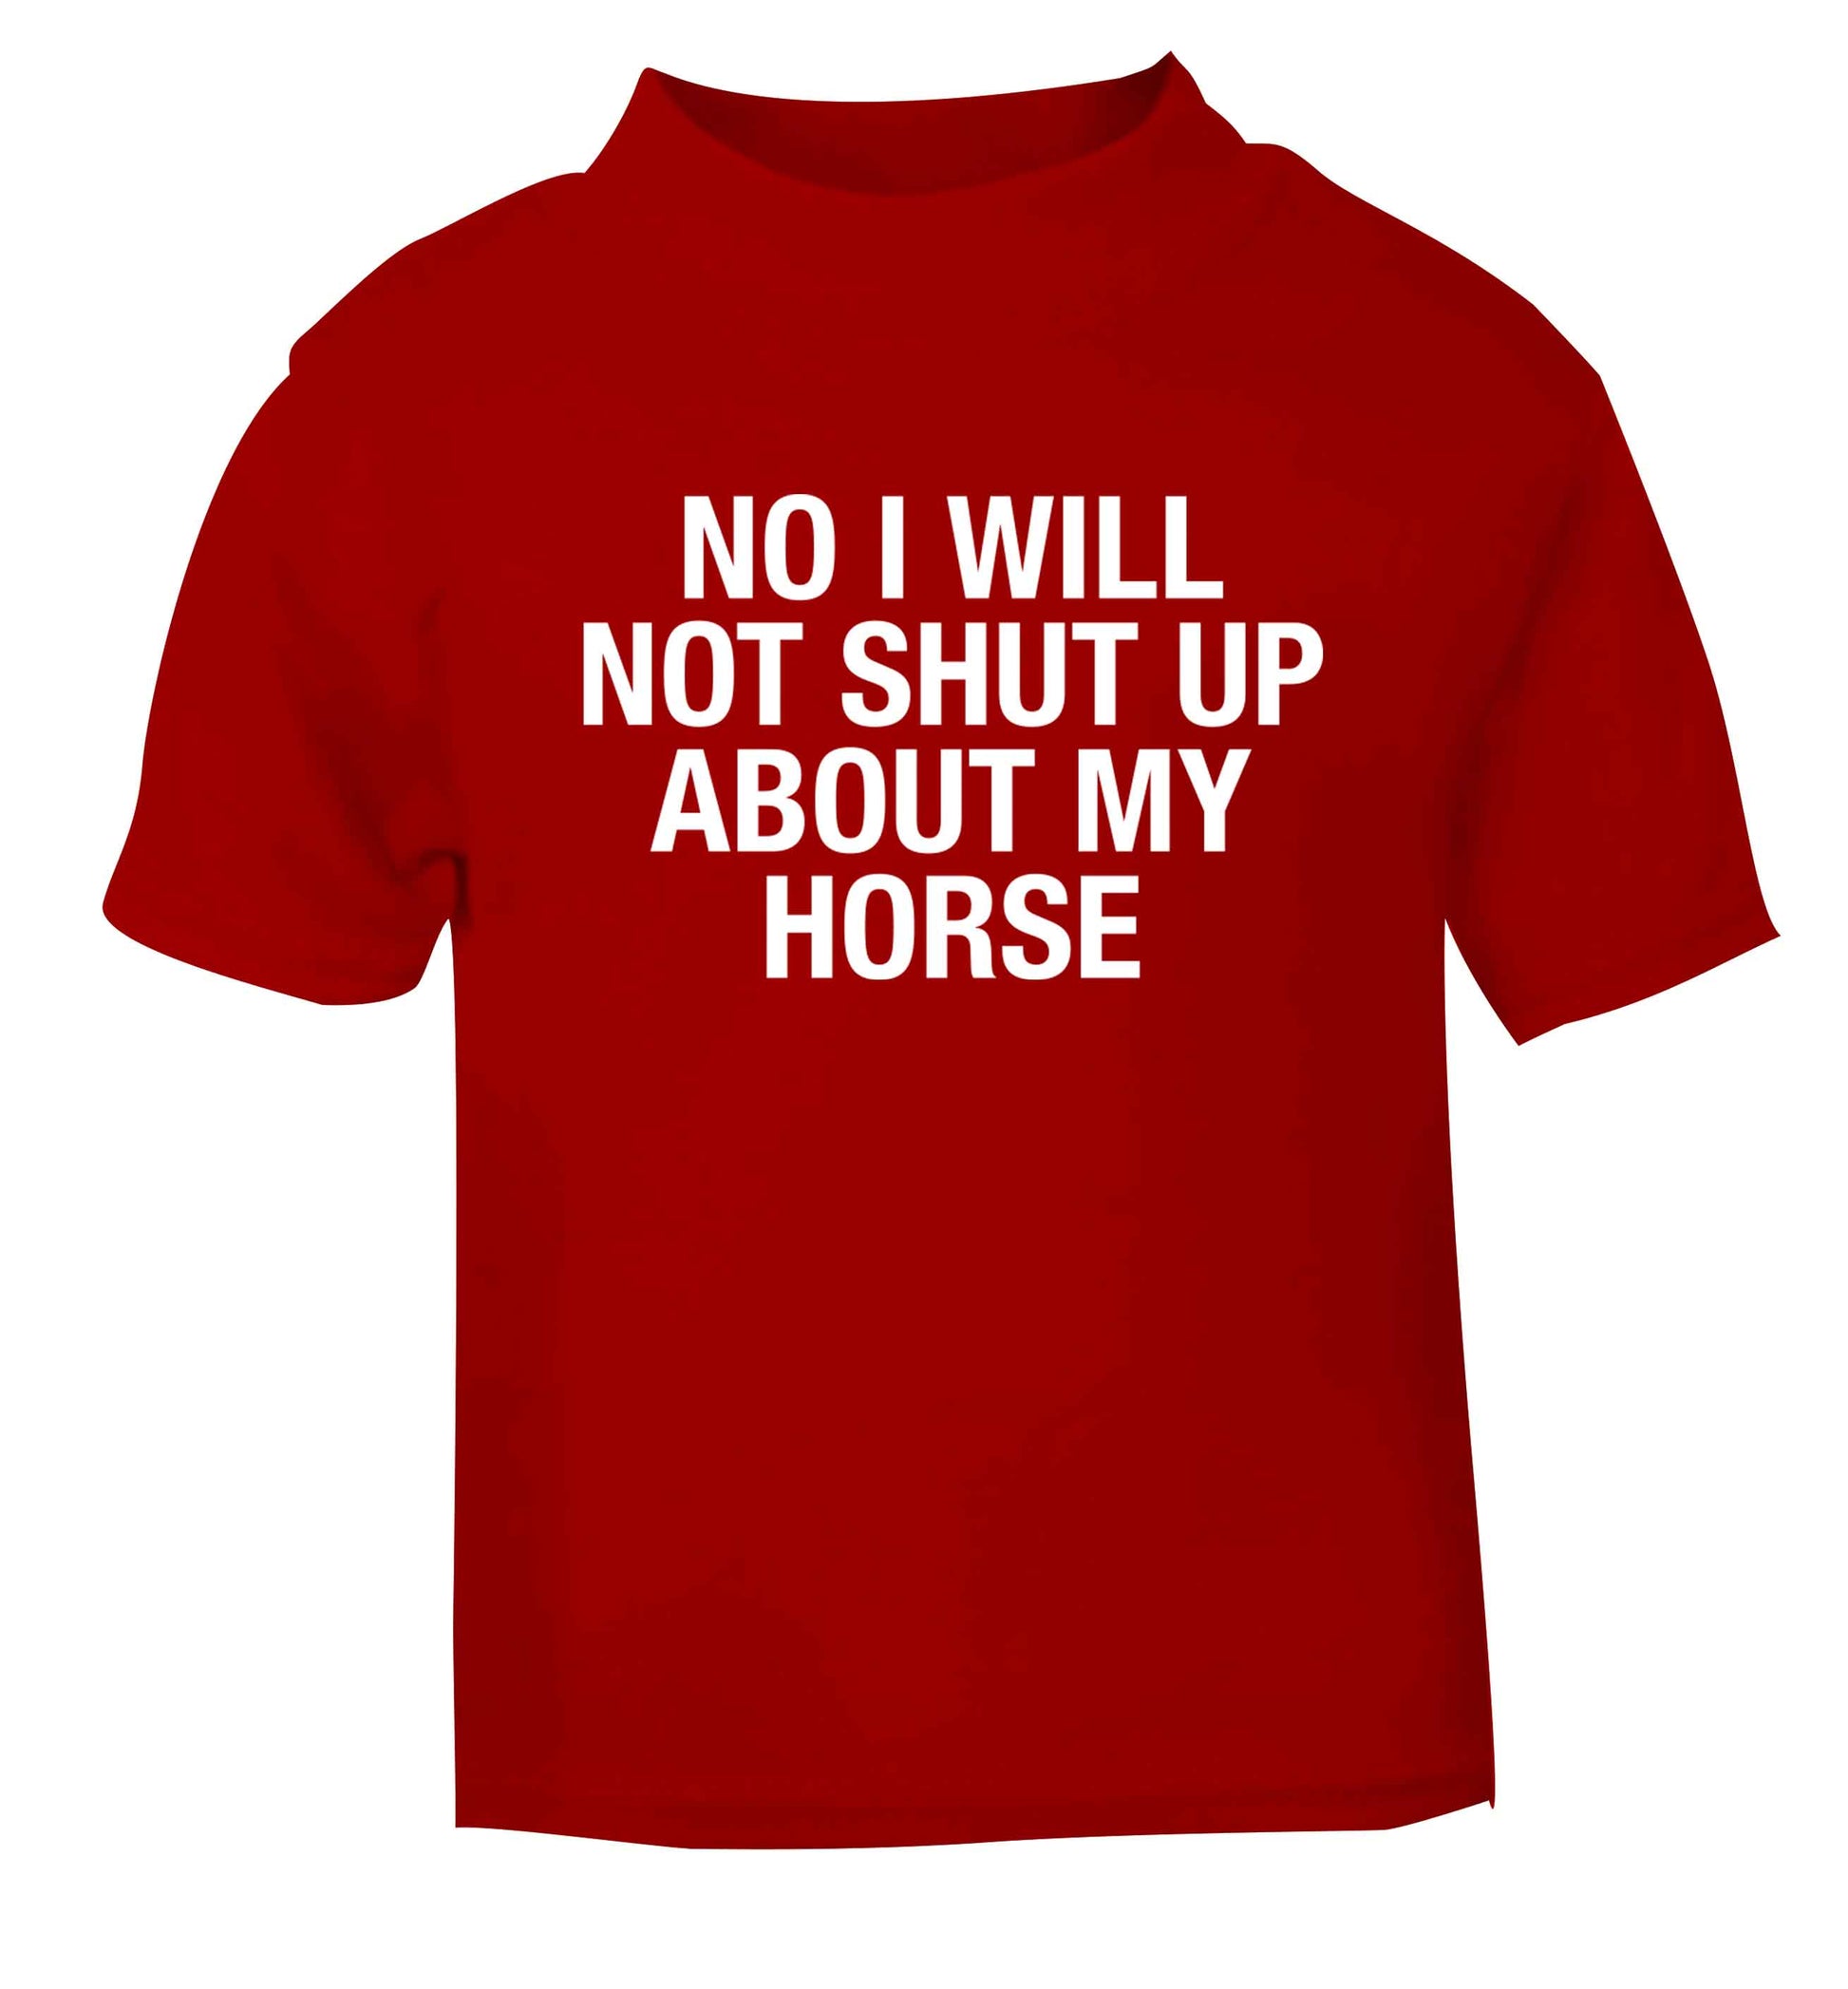 No I will not shut up talking about my horse red baby toddler Tshirt 2 Years